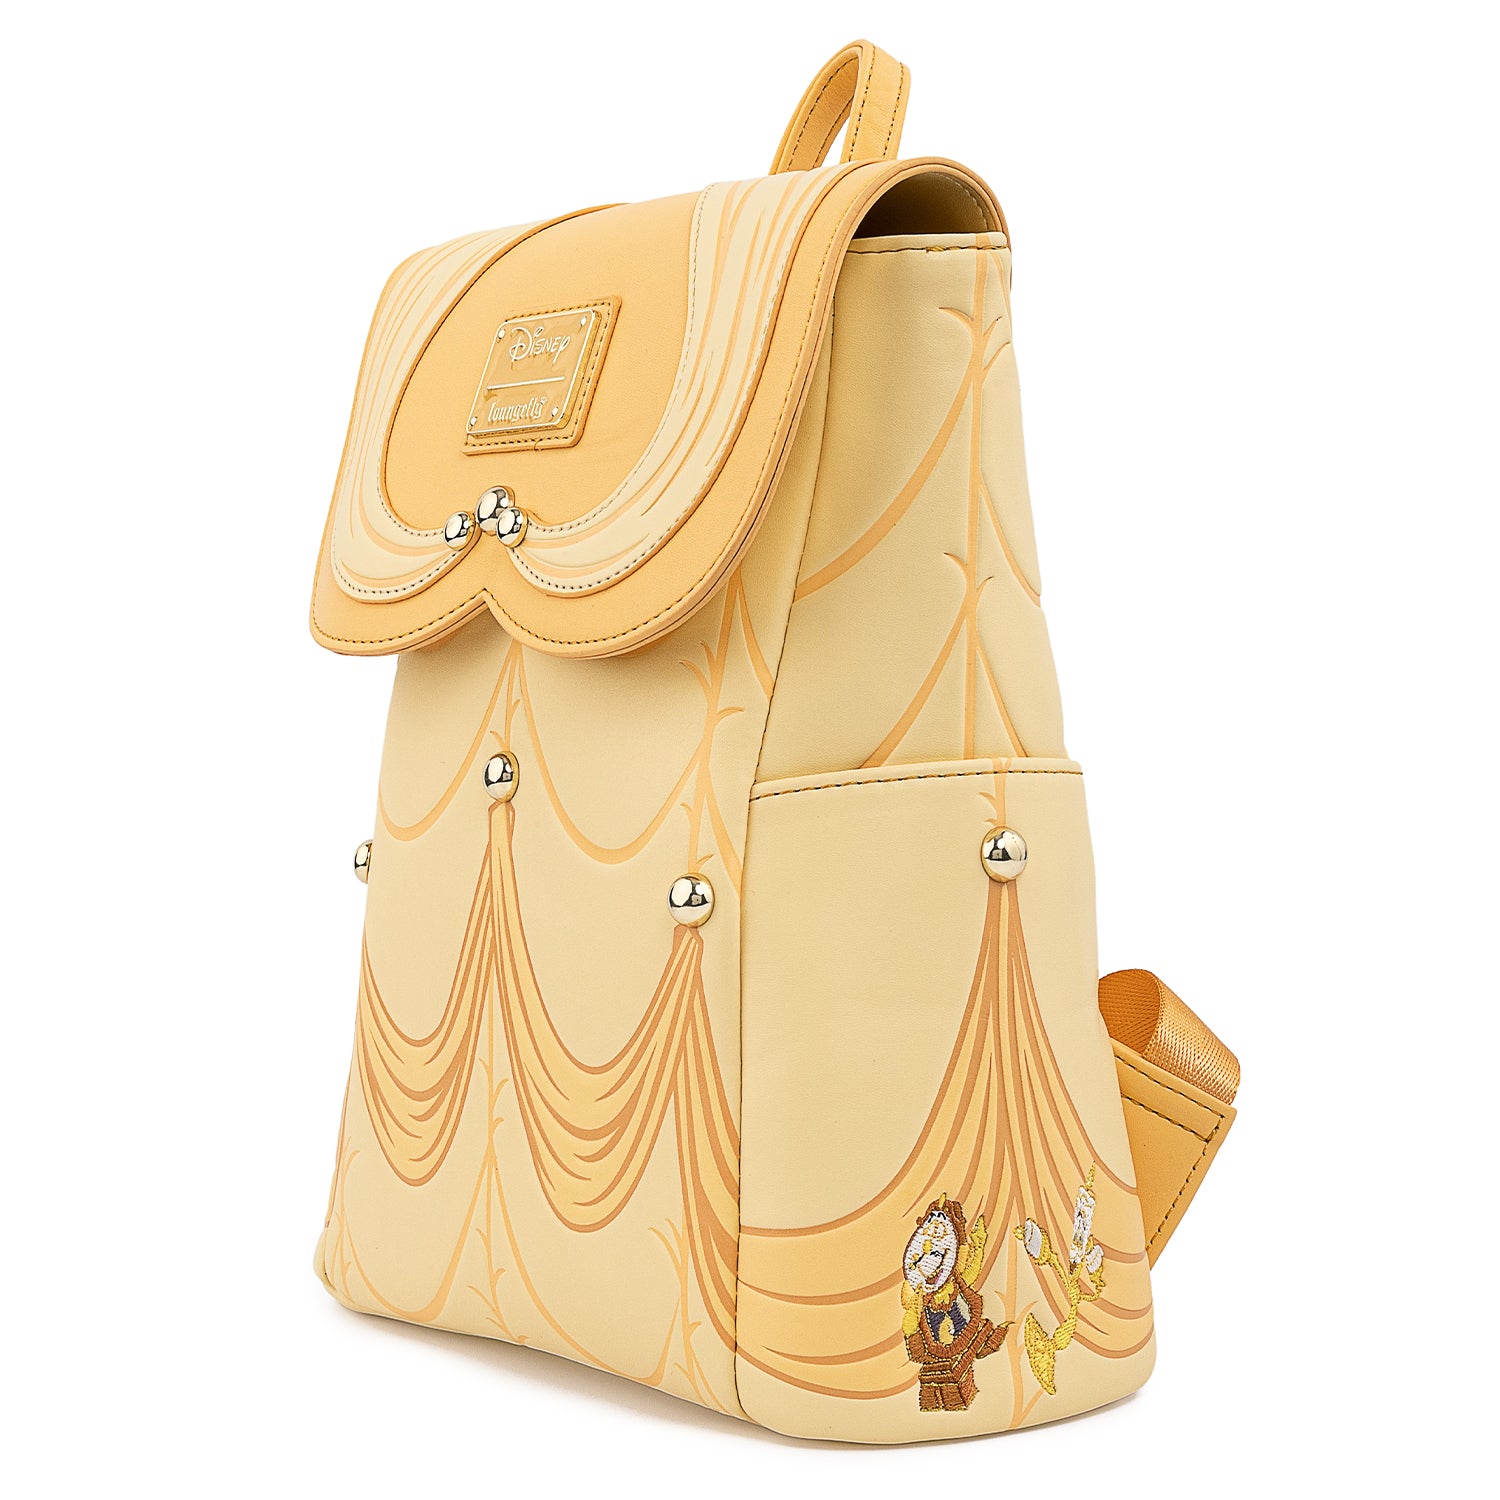 Loungefly Disney Beauty And The Beast Belle Faux Leather Mini Backpack